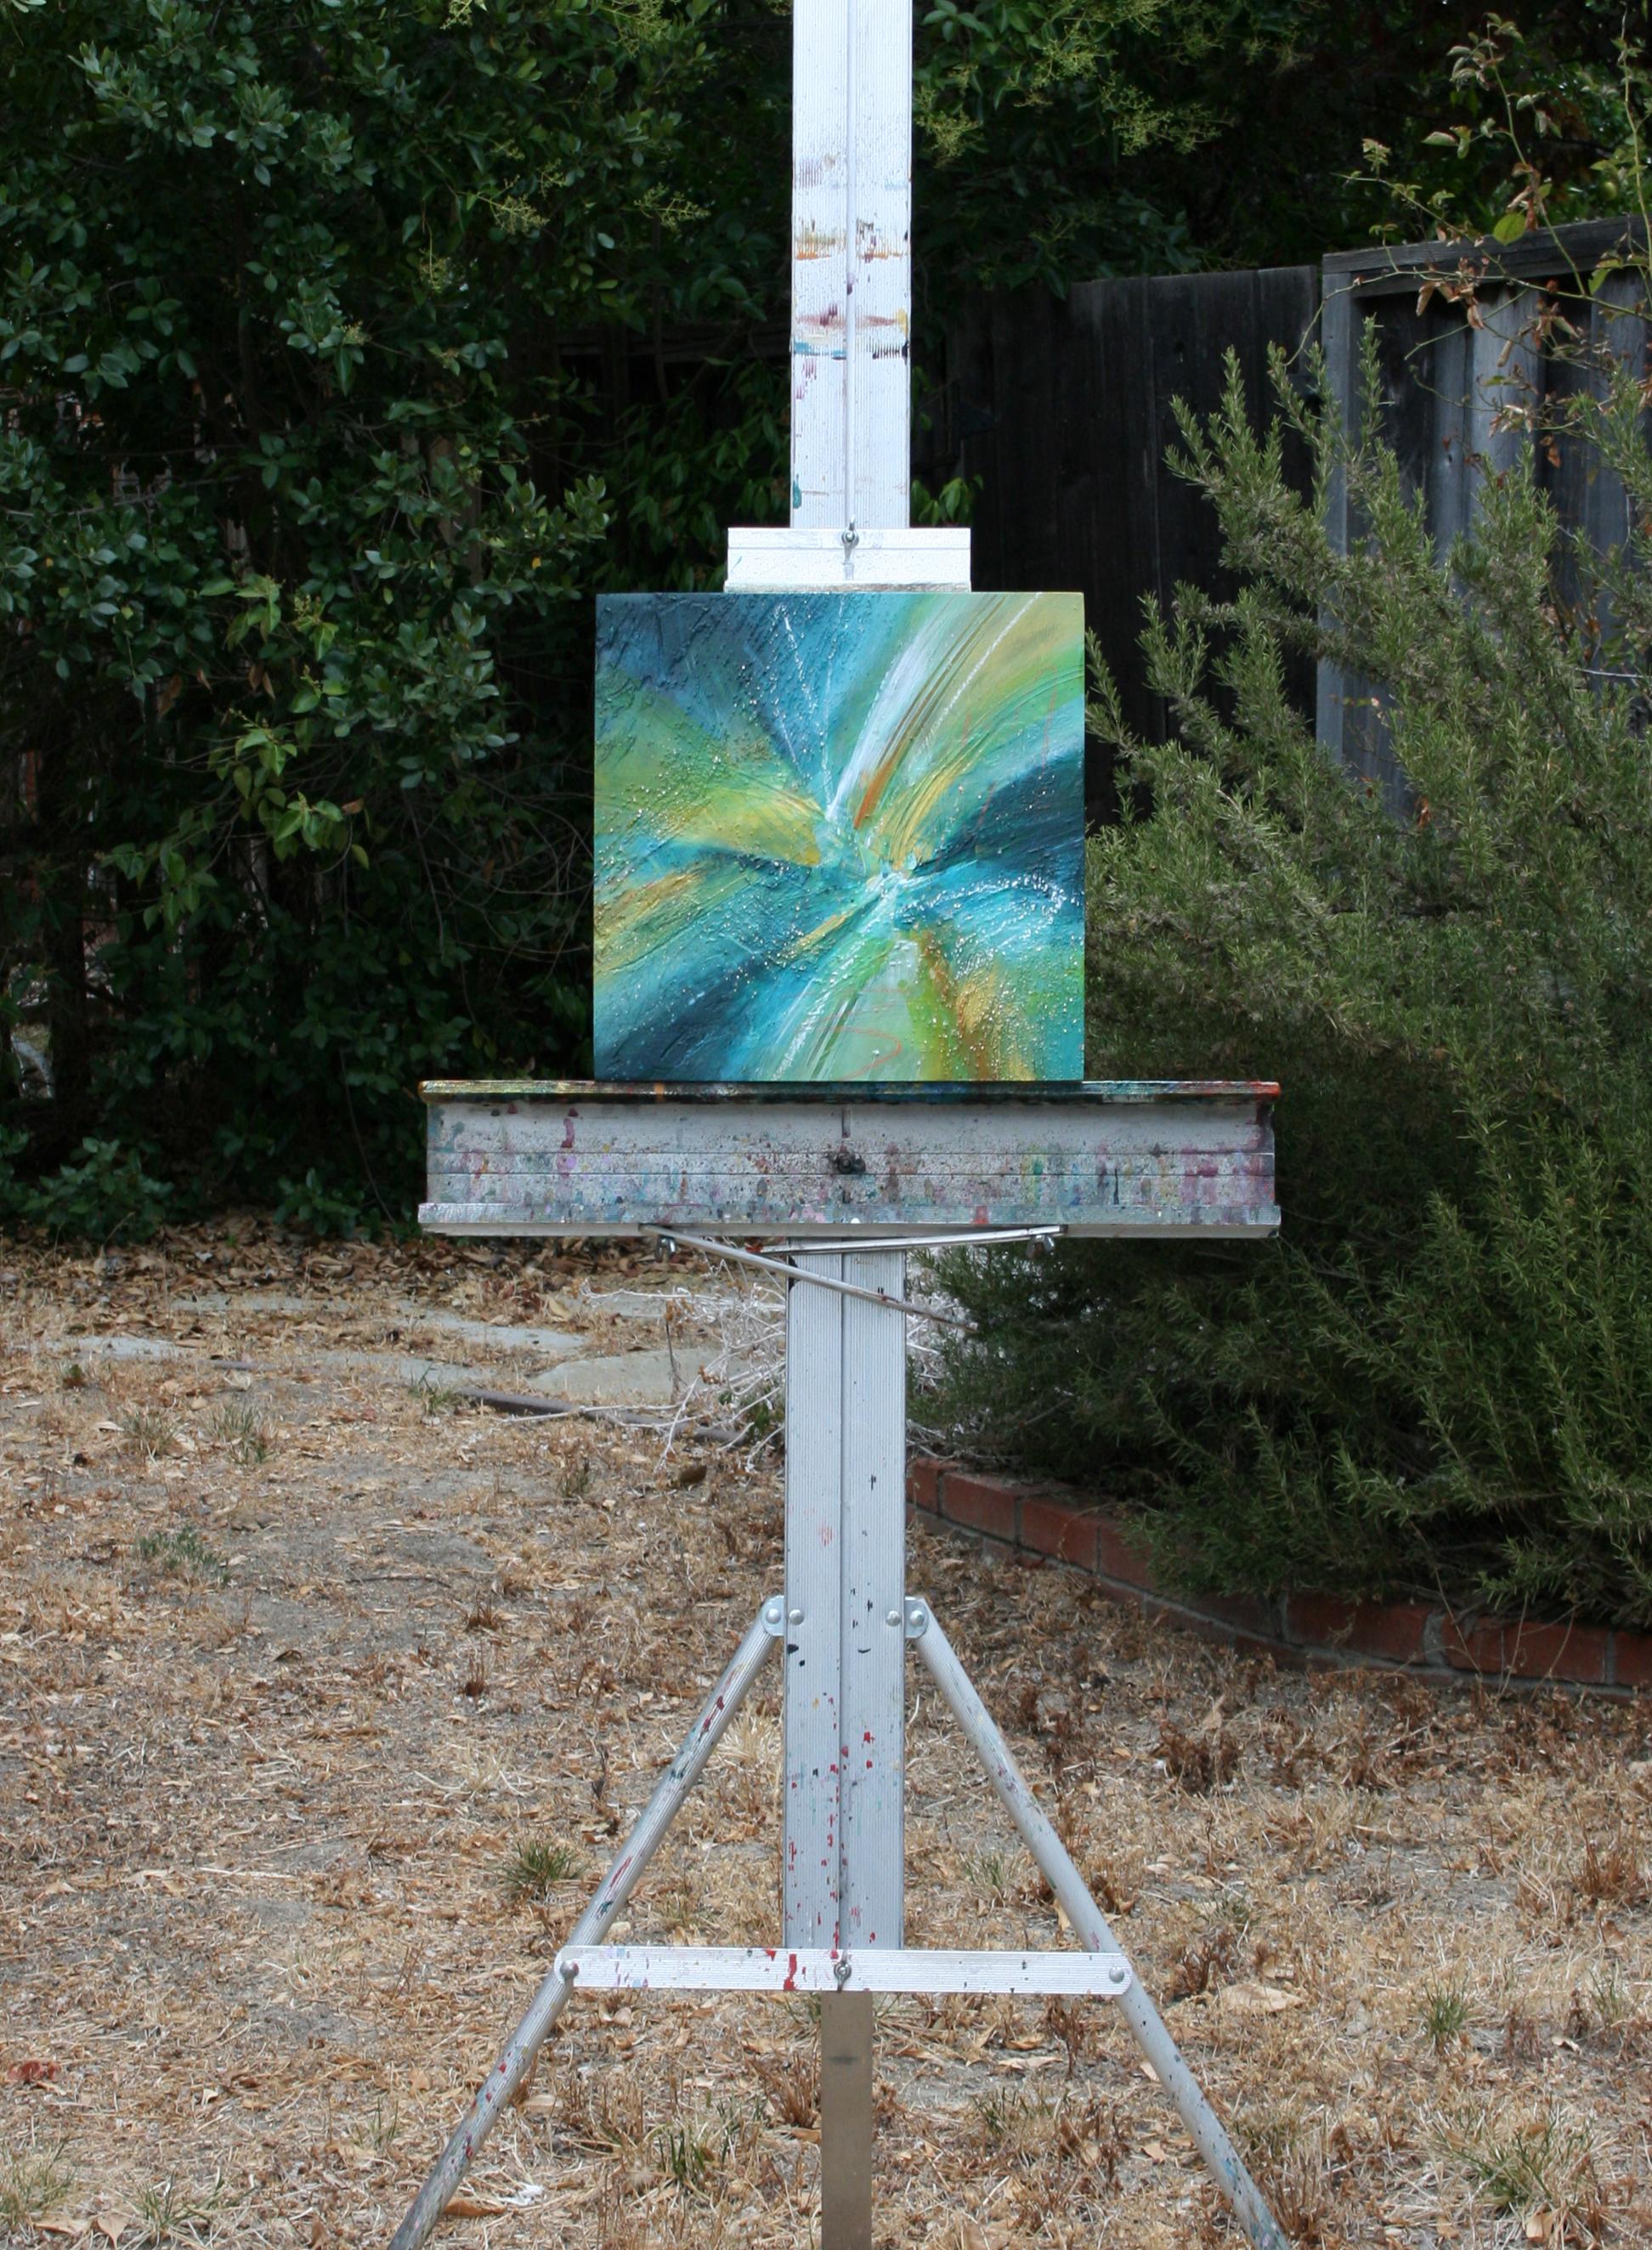 <p>Artist Comments<br />An expressive abstract in rich jewel tones of blue and green, with yellow and orange highlights. Paint flows outward in bursts, evoking joyful energy. For Courtney Jacobs, painting is an intuitive process that requires as